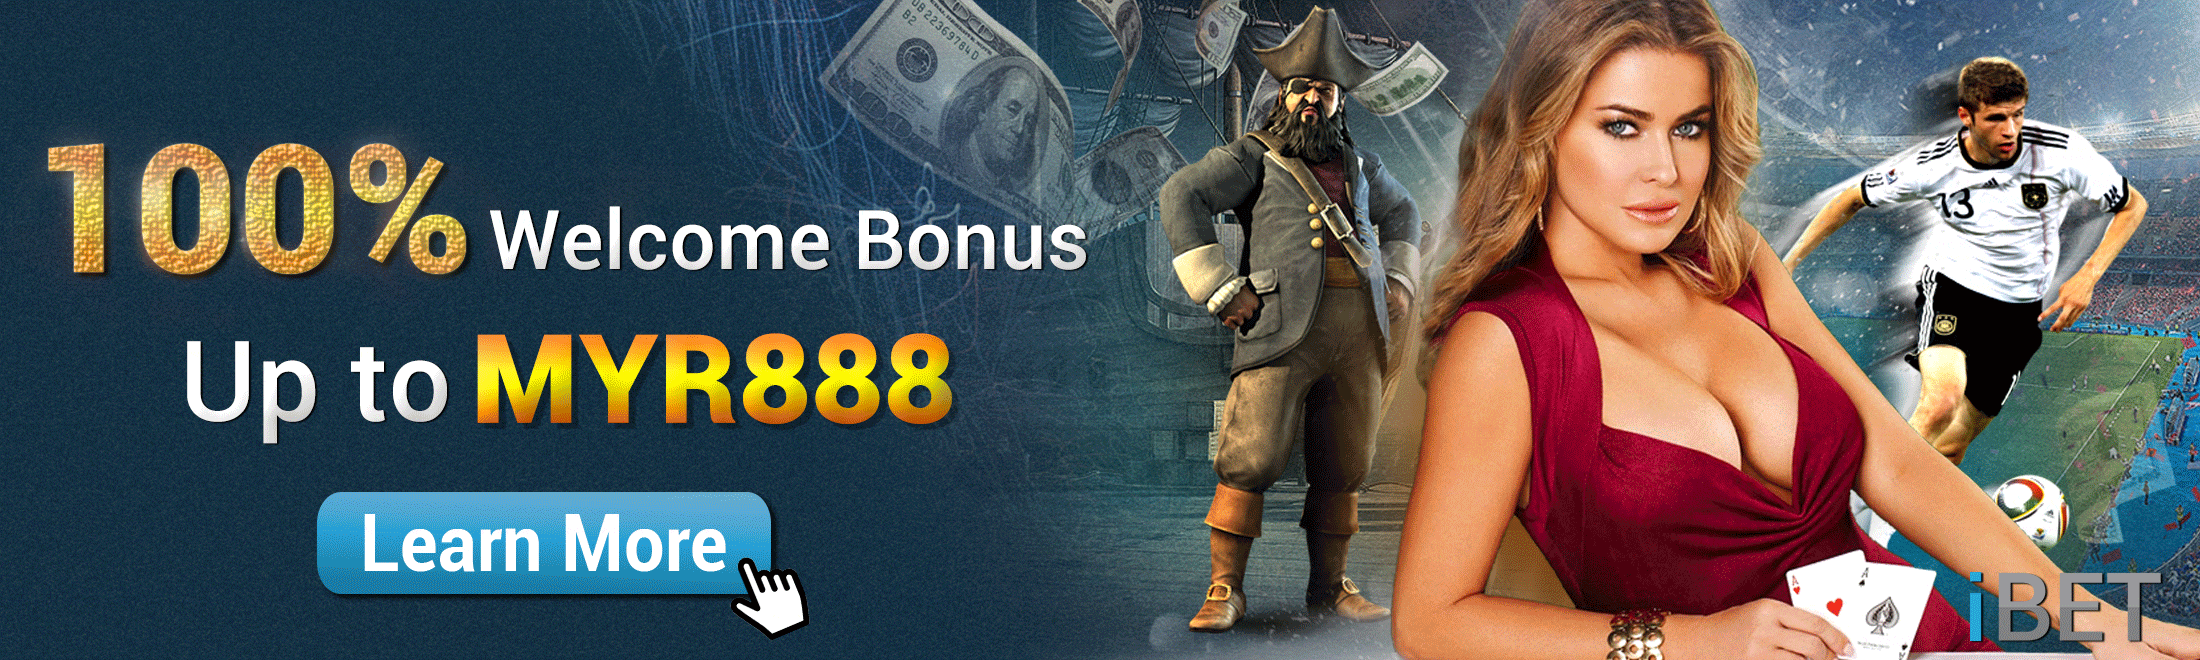 Newtown Slot Games Welcome Bonus Up to RM888 in iBET!